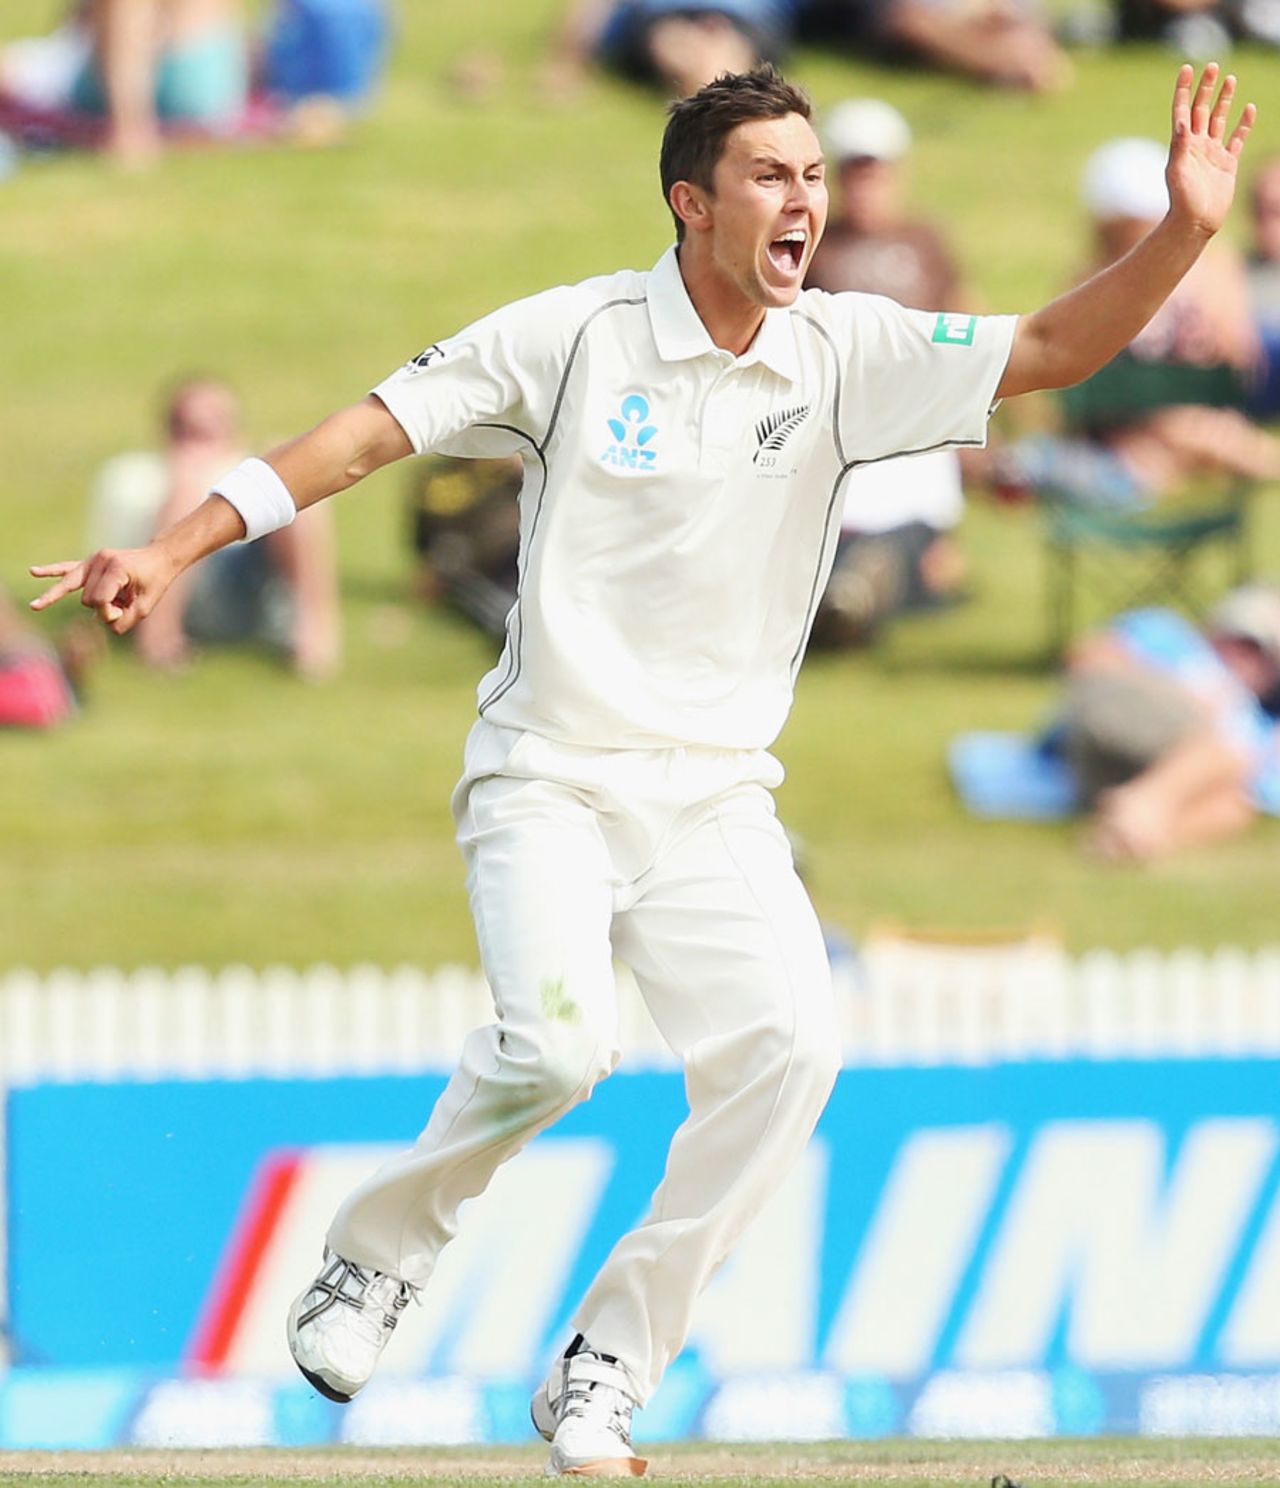 Trent Boult celebrates the fall of another West Indian wicket, New Zealand v West Indies, 3rd Test, Hamilton, 3rd day, December 21, 2013